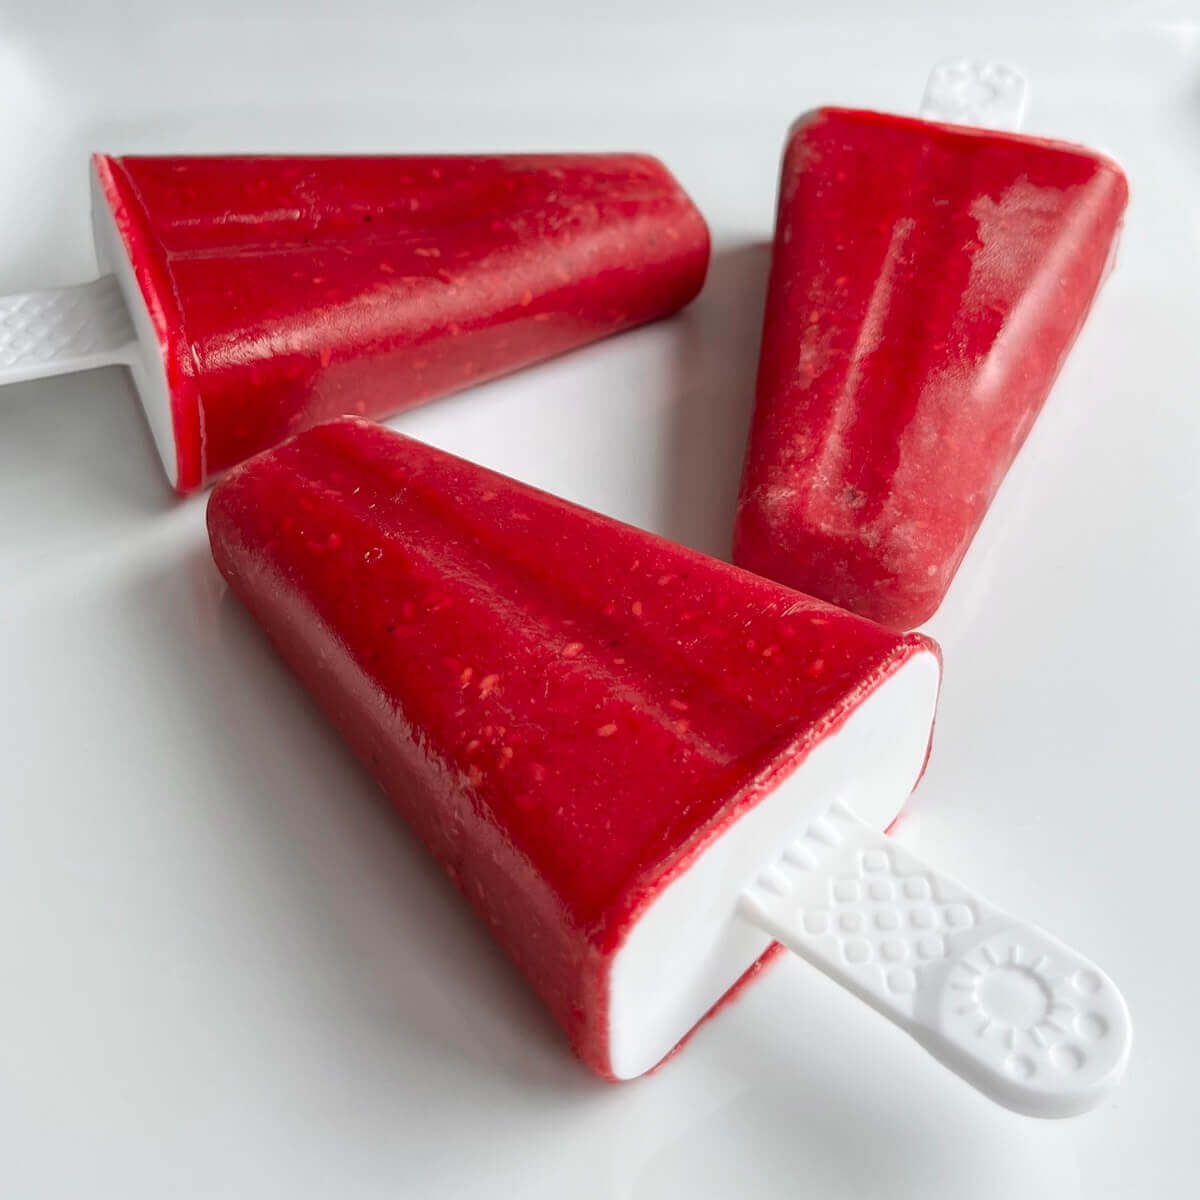 Three raspberry popsicles on a white plate.